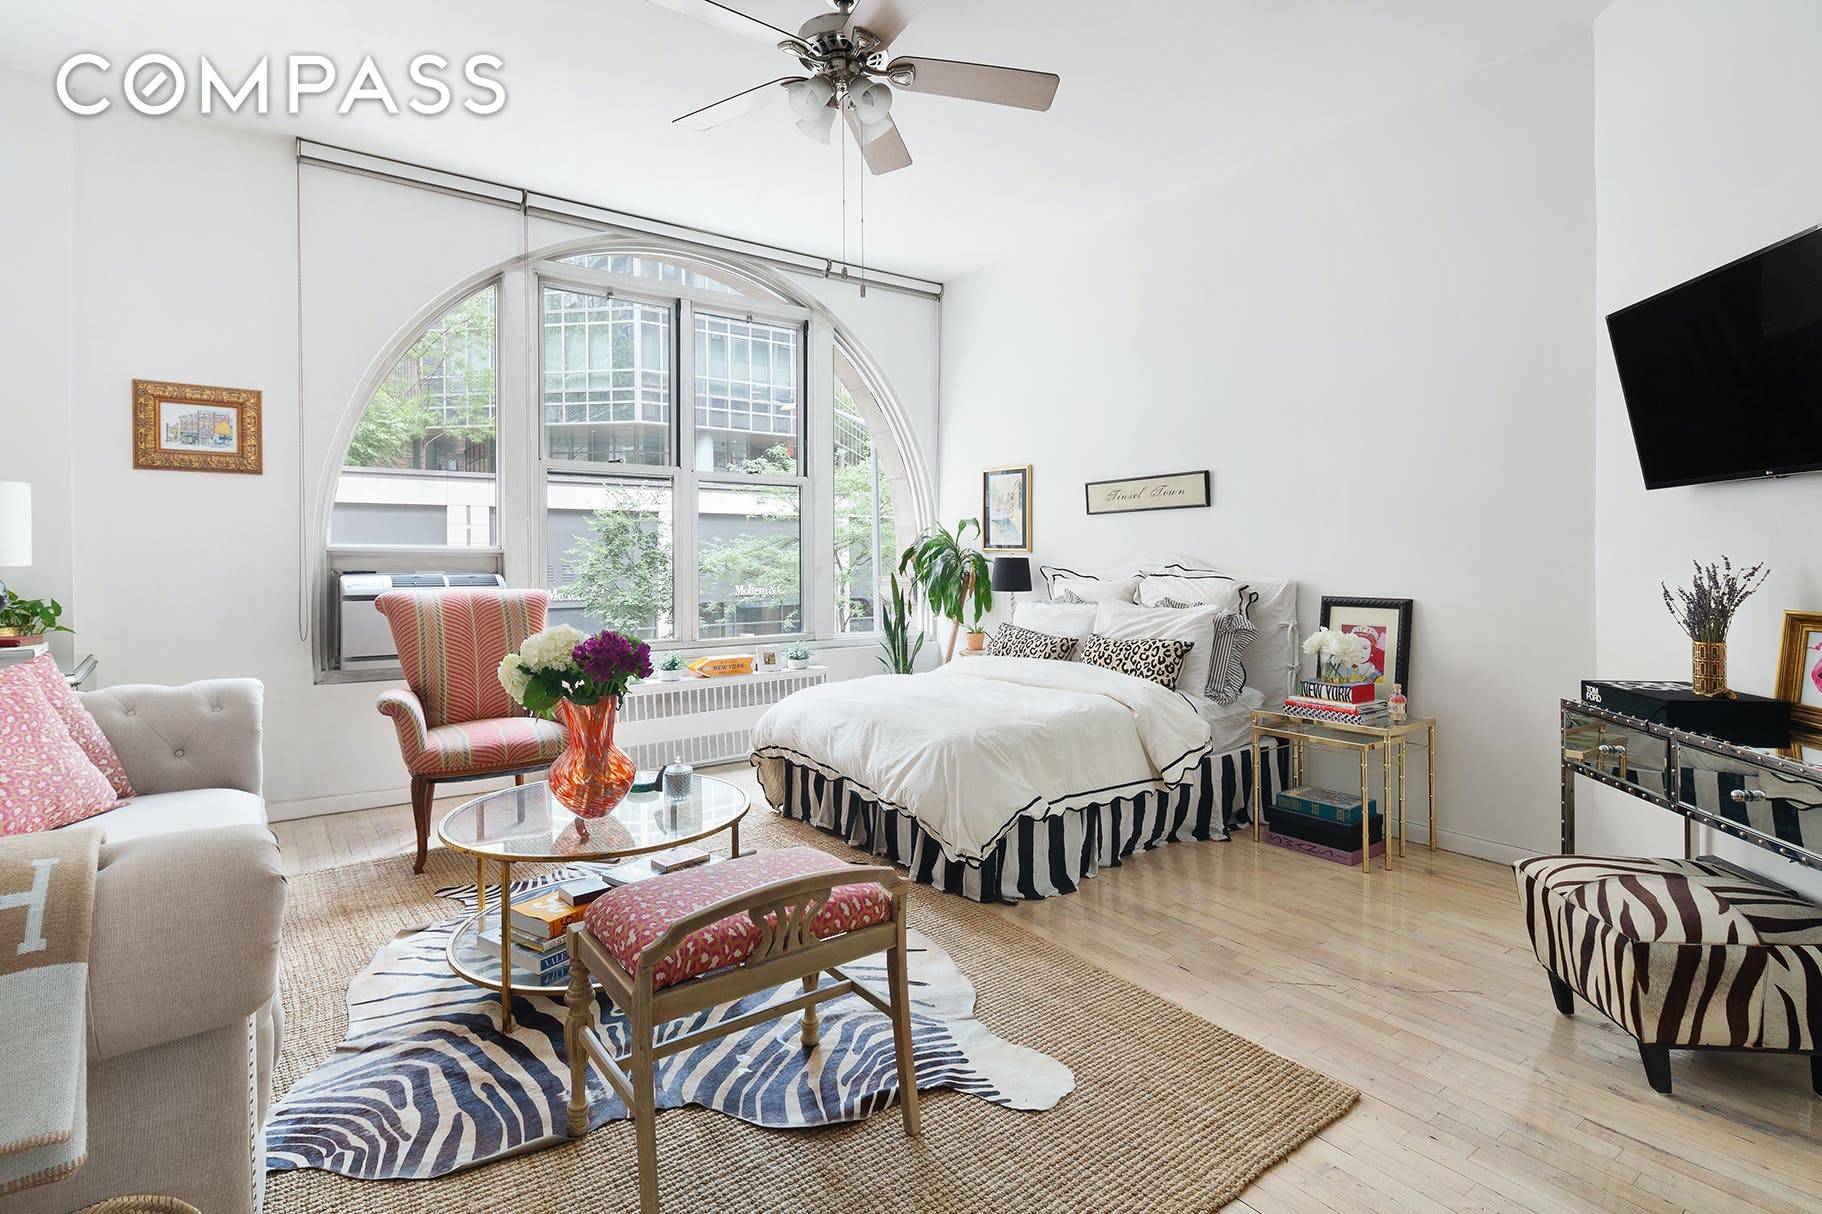 Rare pre war studio loft with 10 foot ceilings and a dreamy double wide arched window flooding the home with natural light.